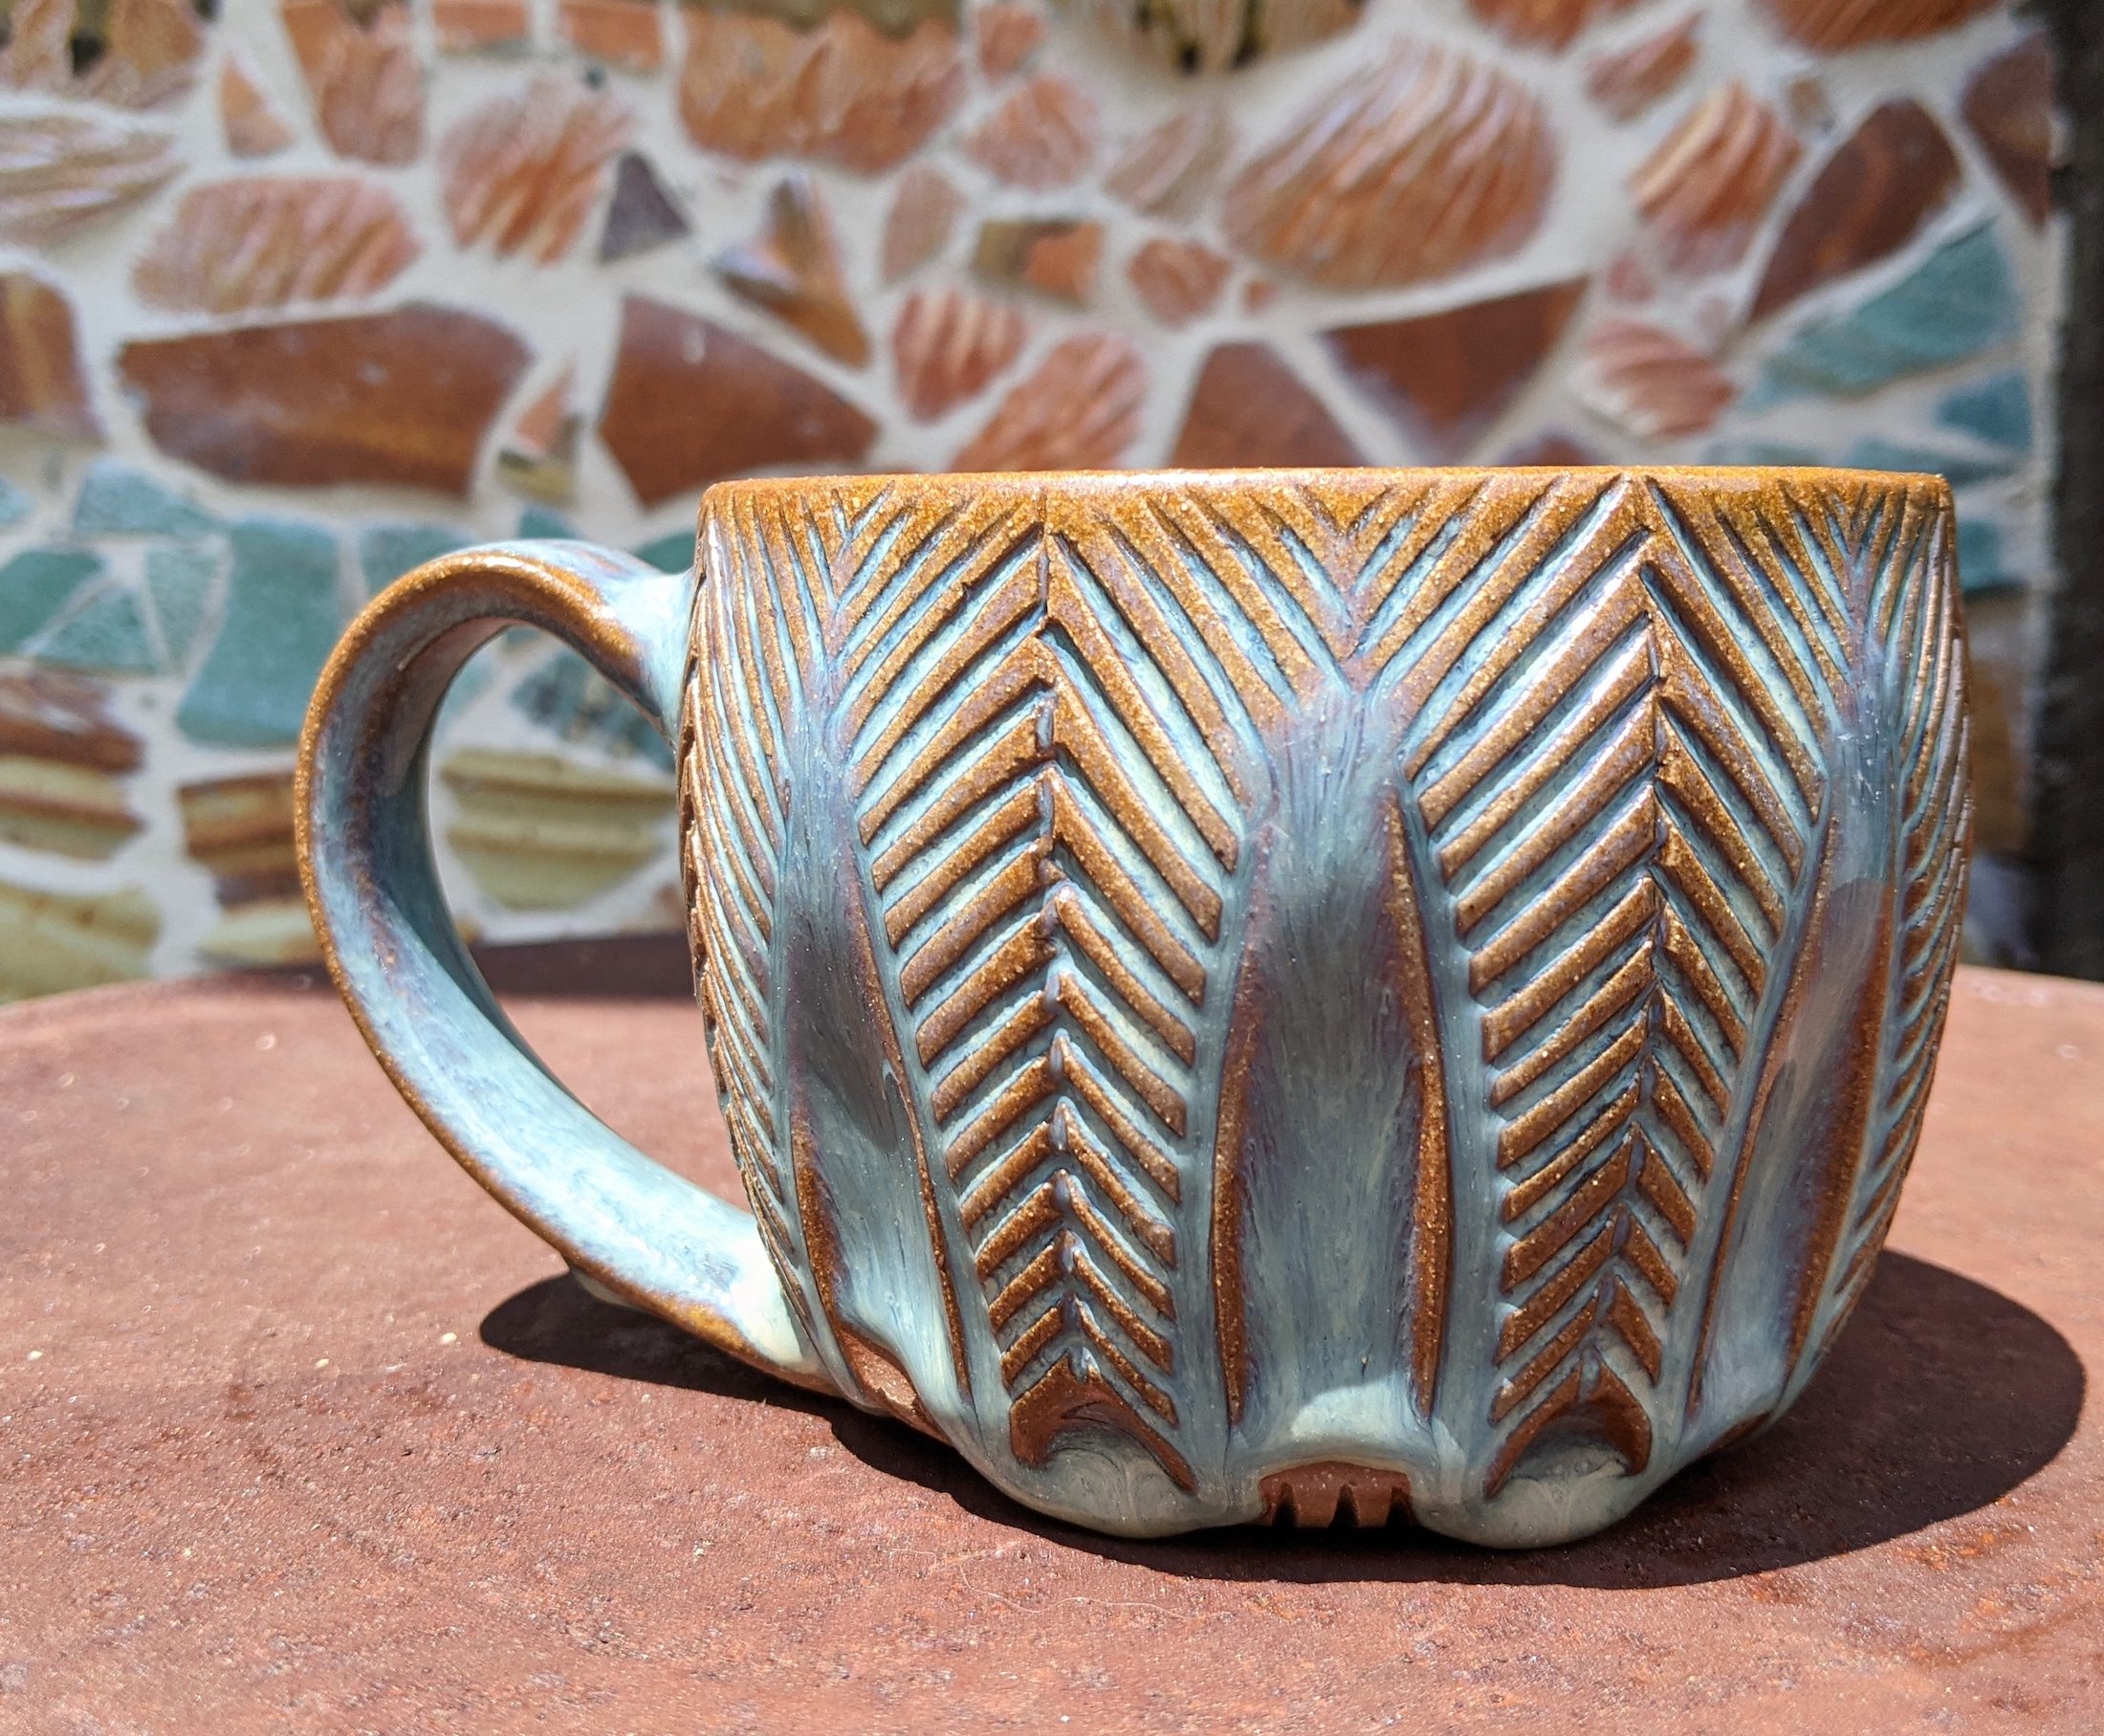 Carved Mug with Blue Glaze in front of a mosaic wall